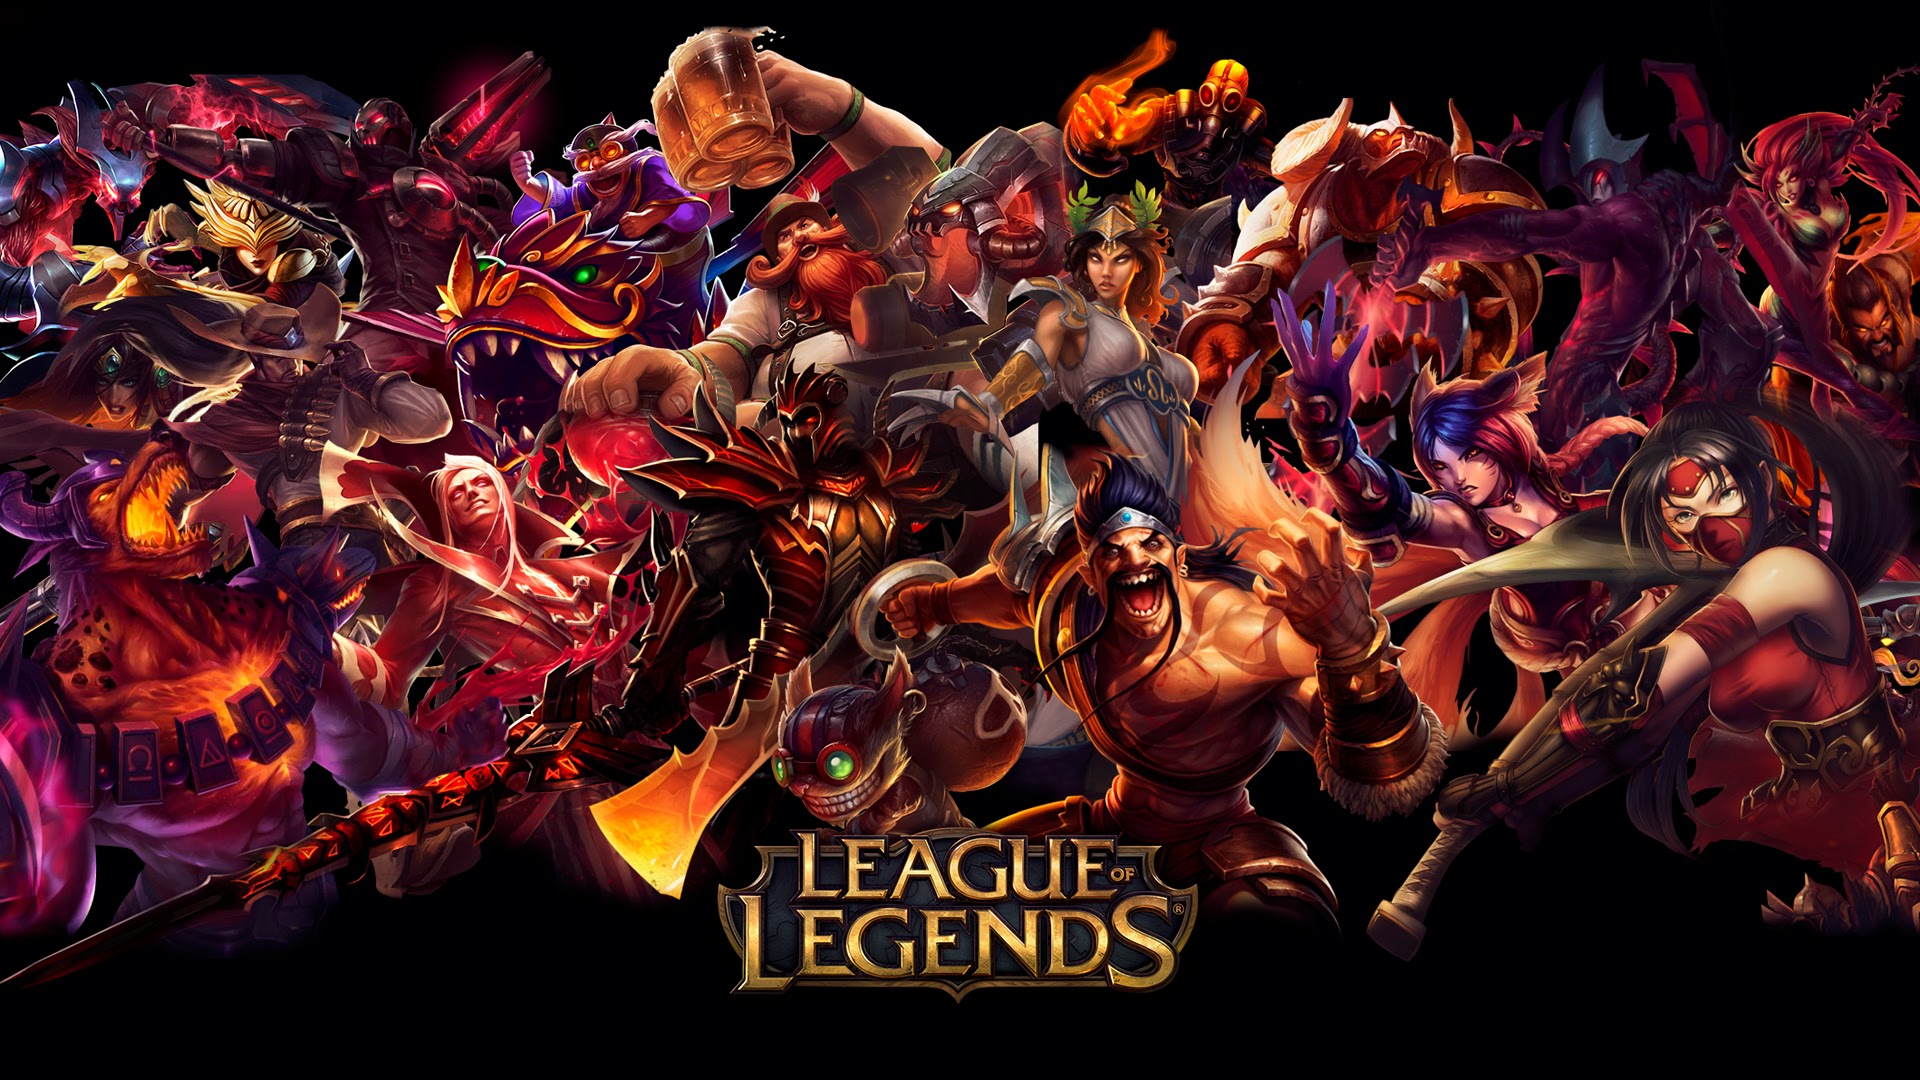  league of legends red hd wallpaper background lol champion 1920x1080 1920x1080